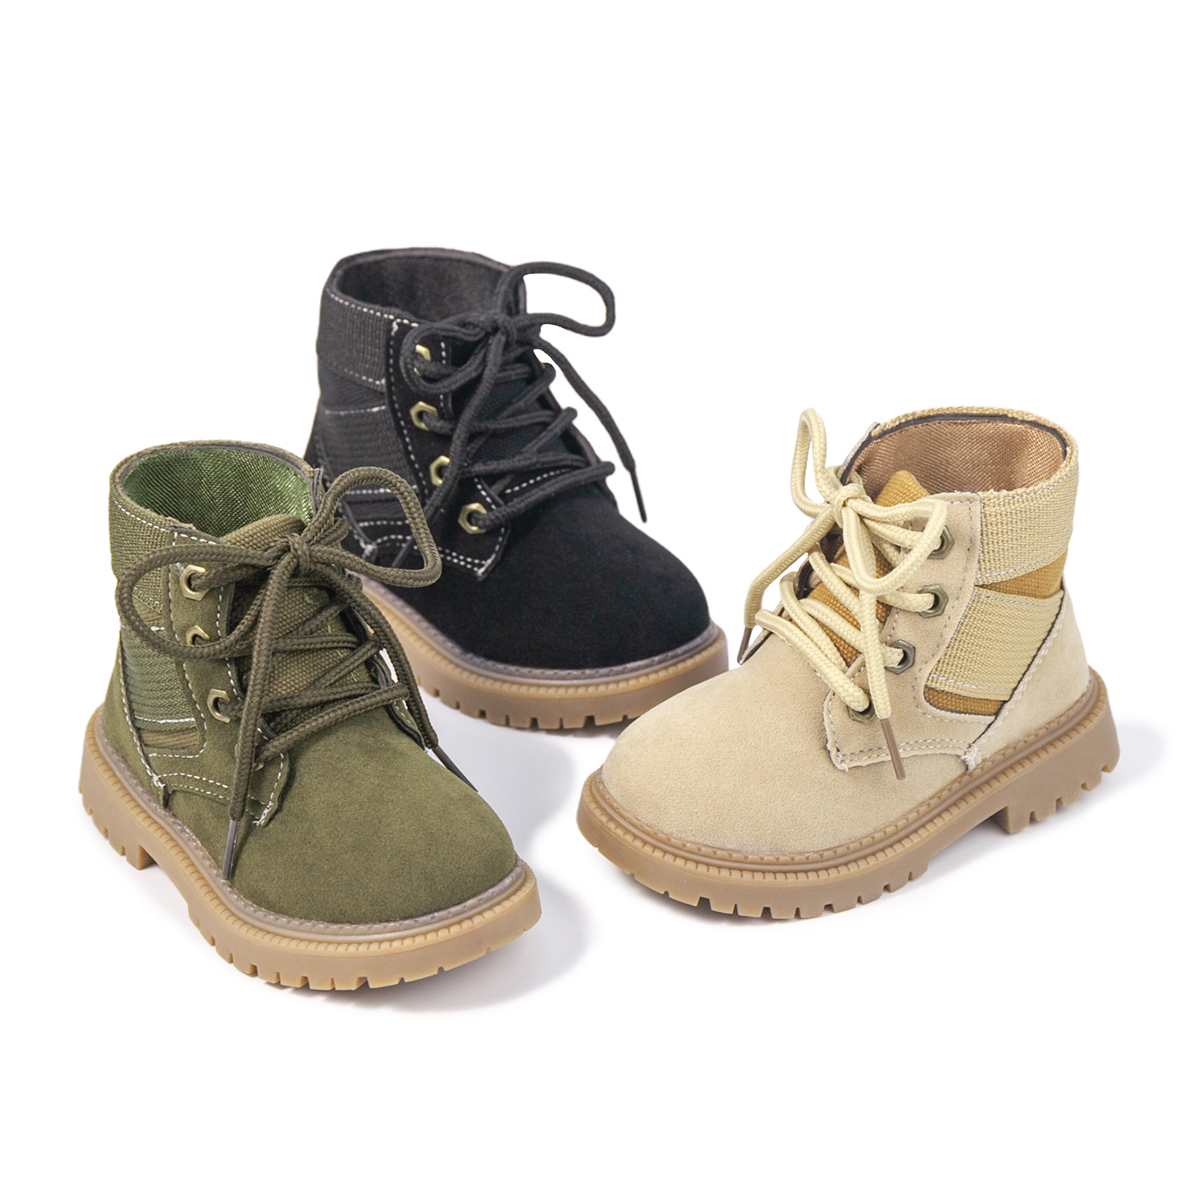 Kids Boots-baby shoe wholesaler, supplier, and manufacturer